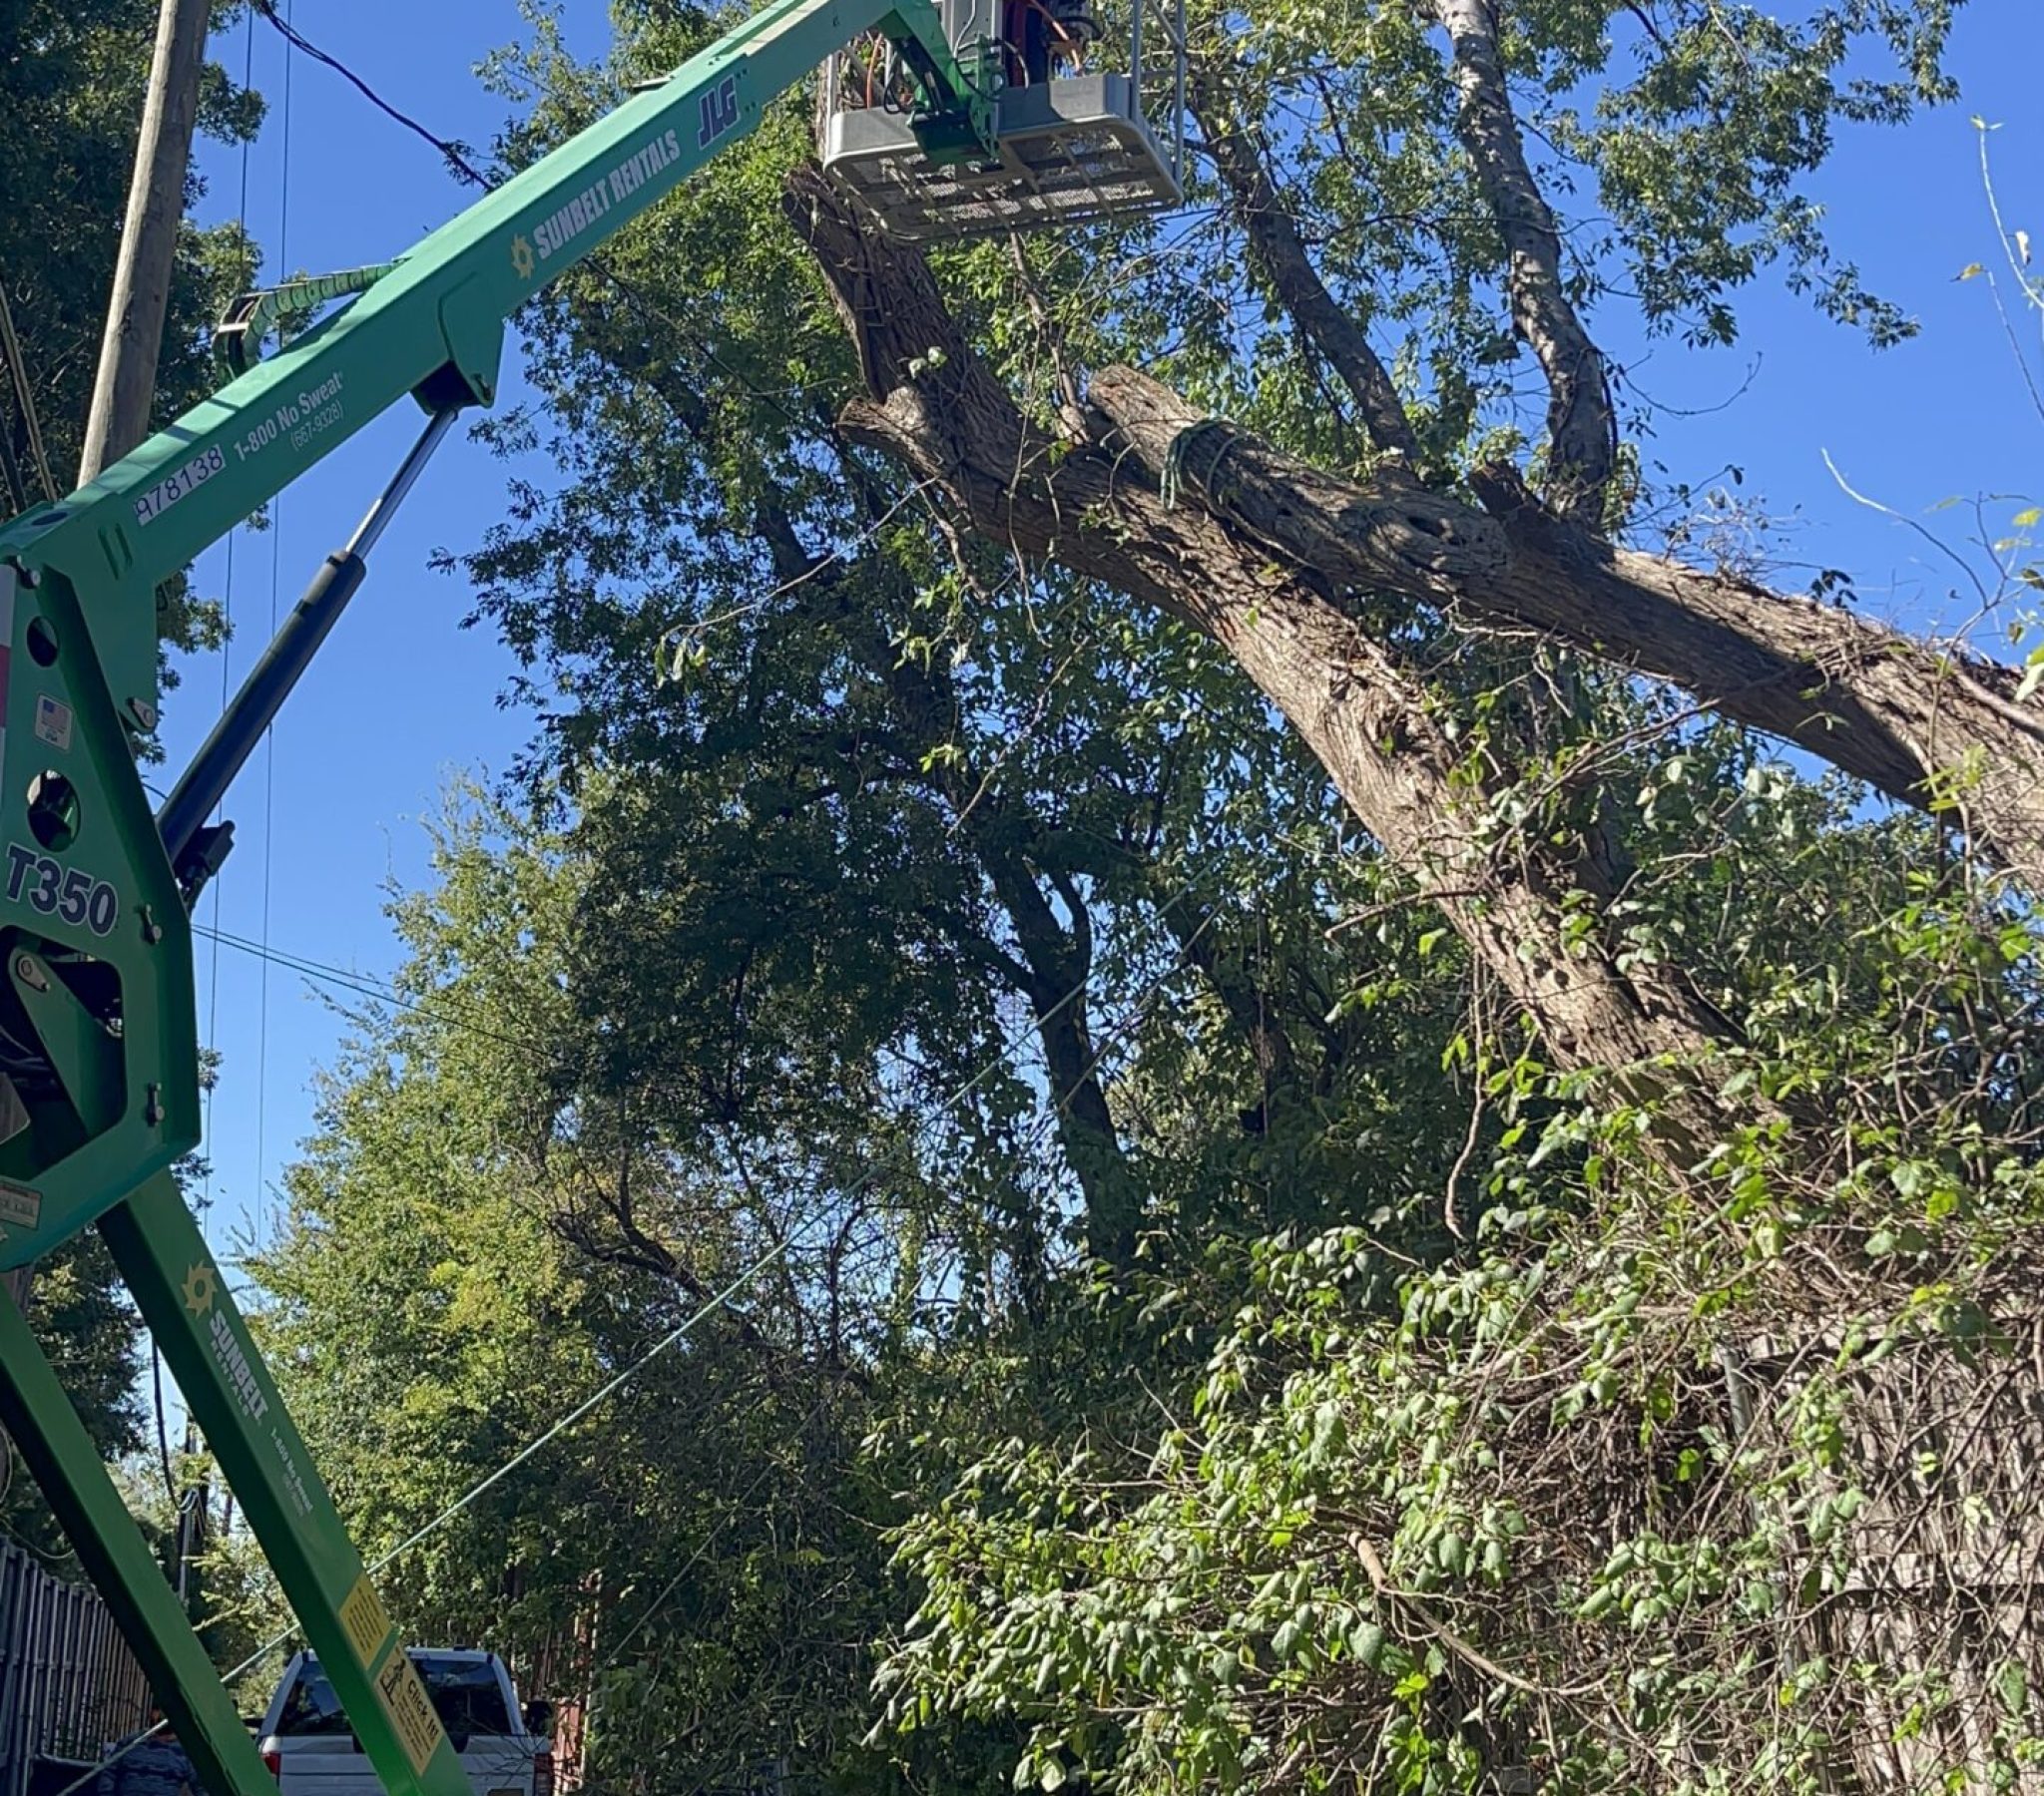 Commercial Tree Services in Texas